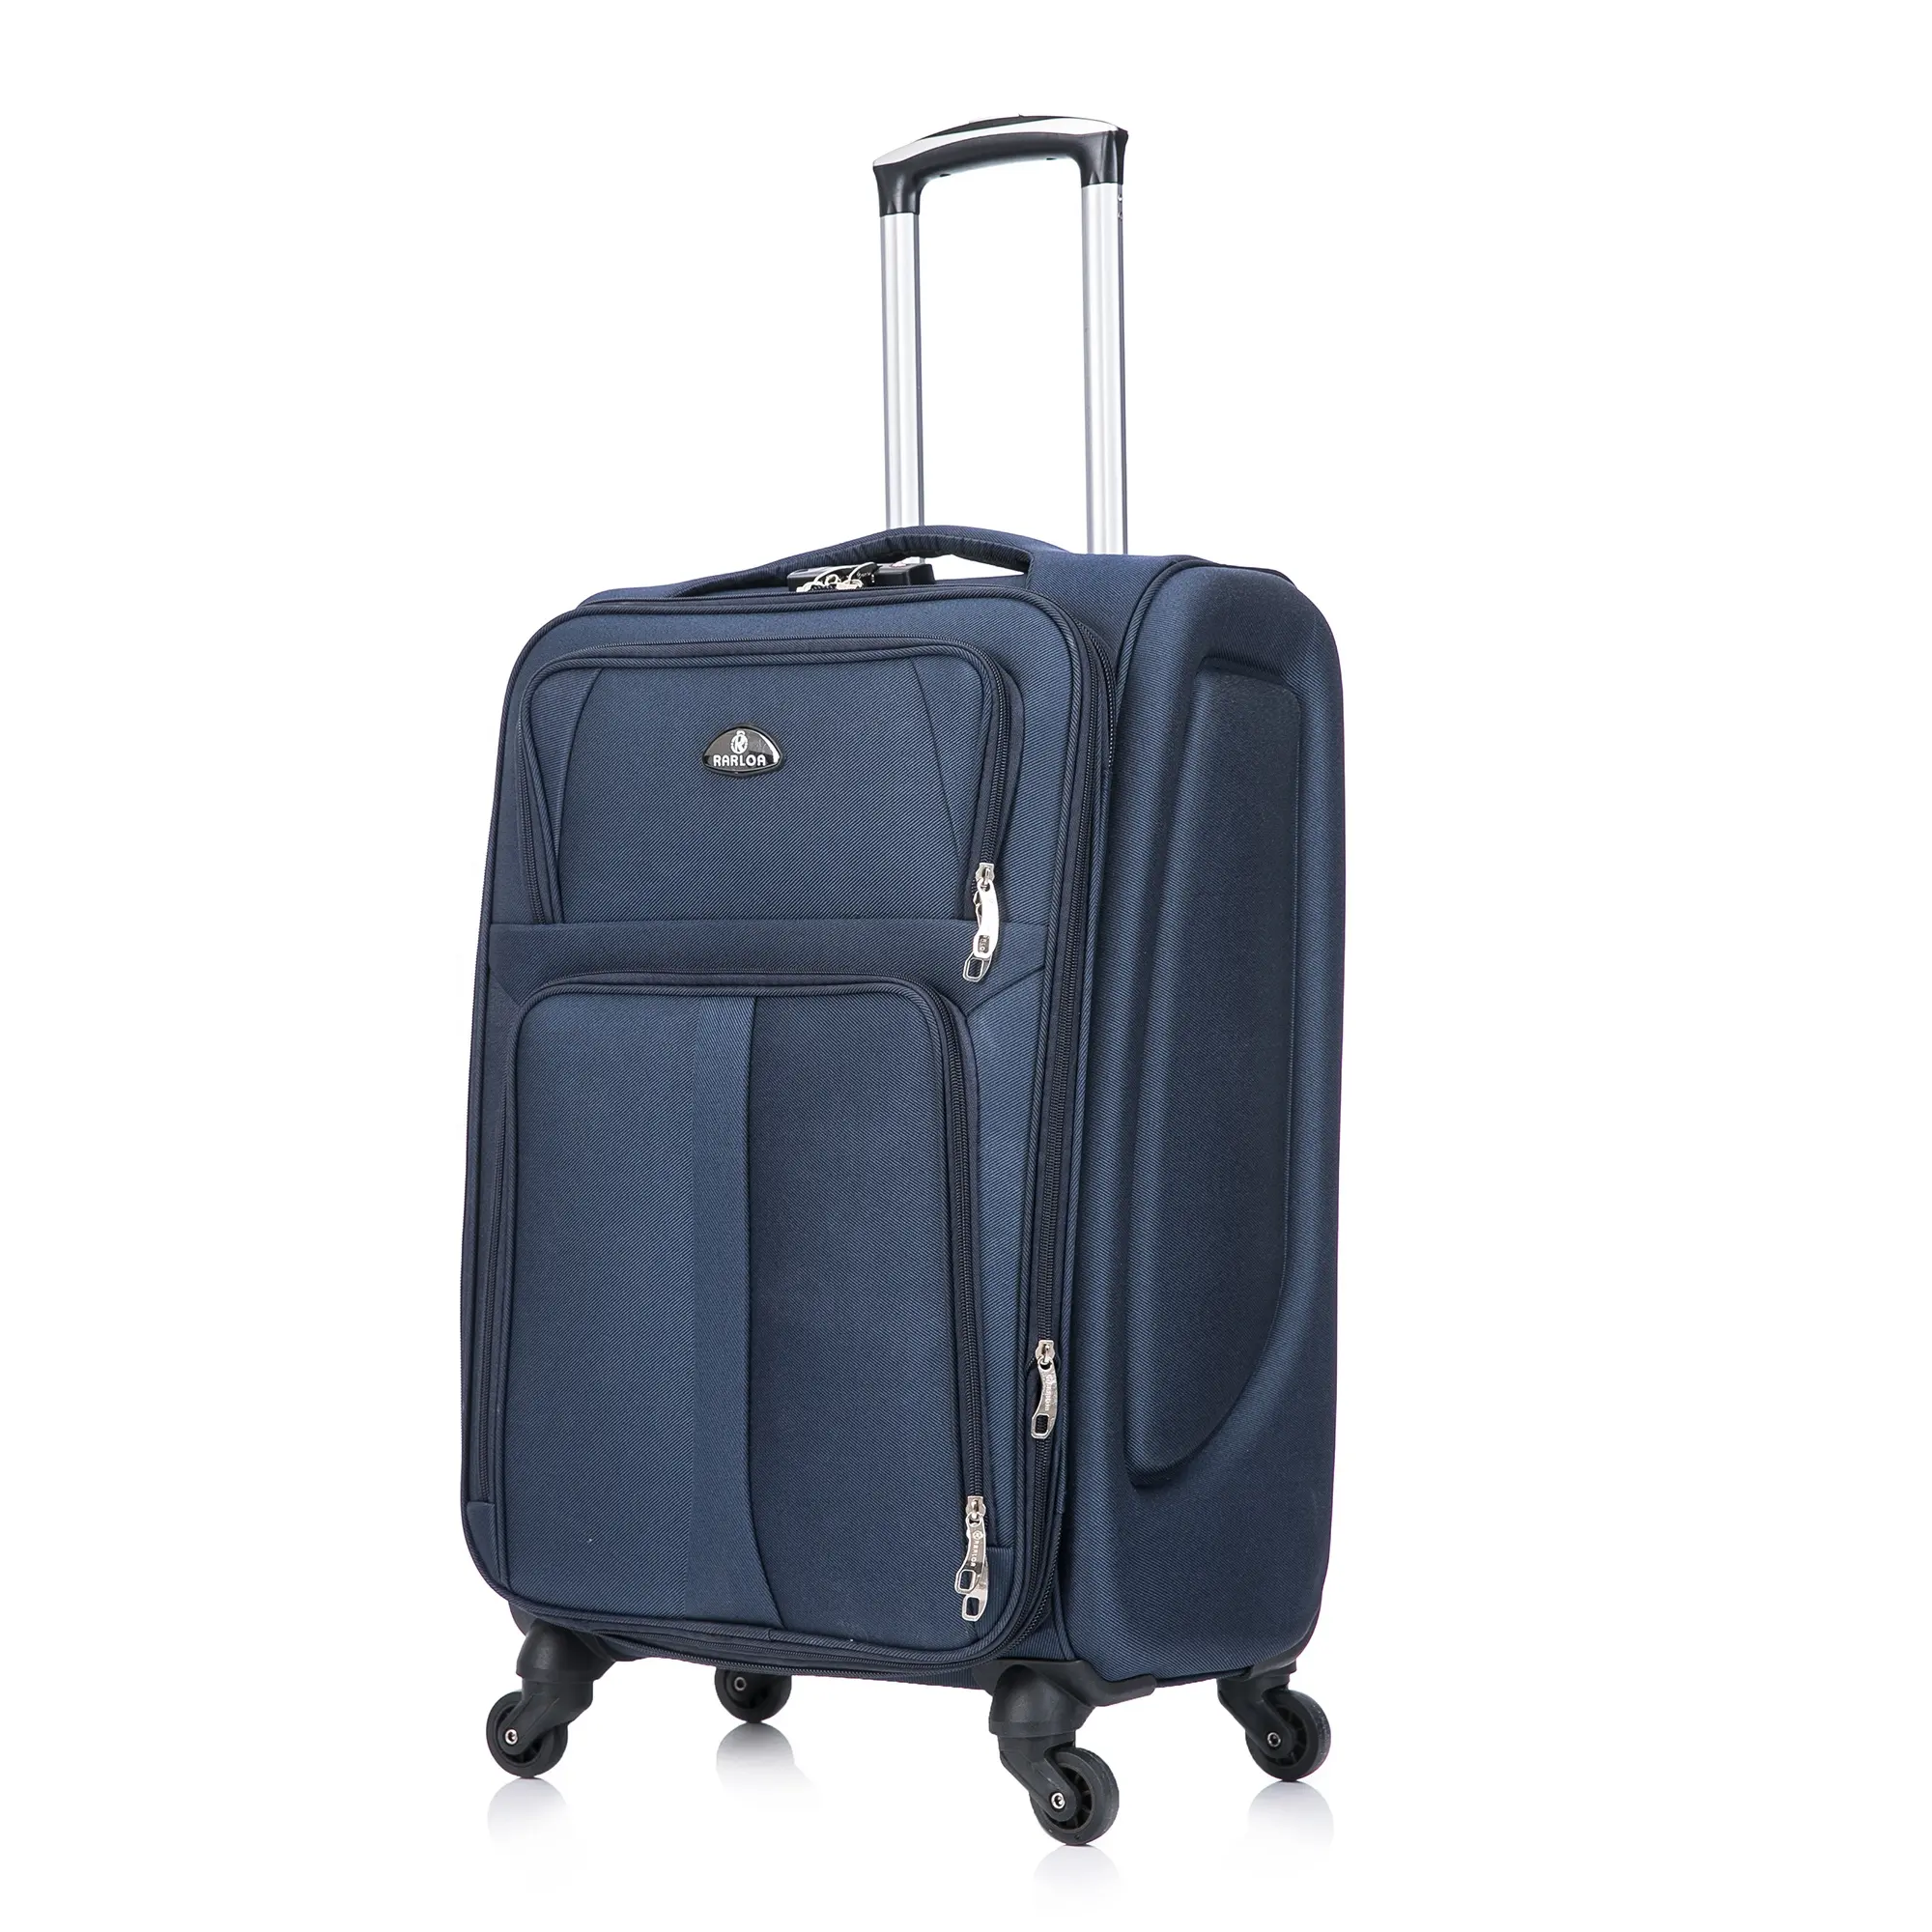 Hot sale 4 wheels new design name brand suit cases travelling bags 3pcs luggage trolley set suitcase